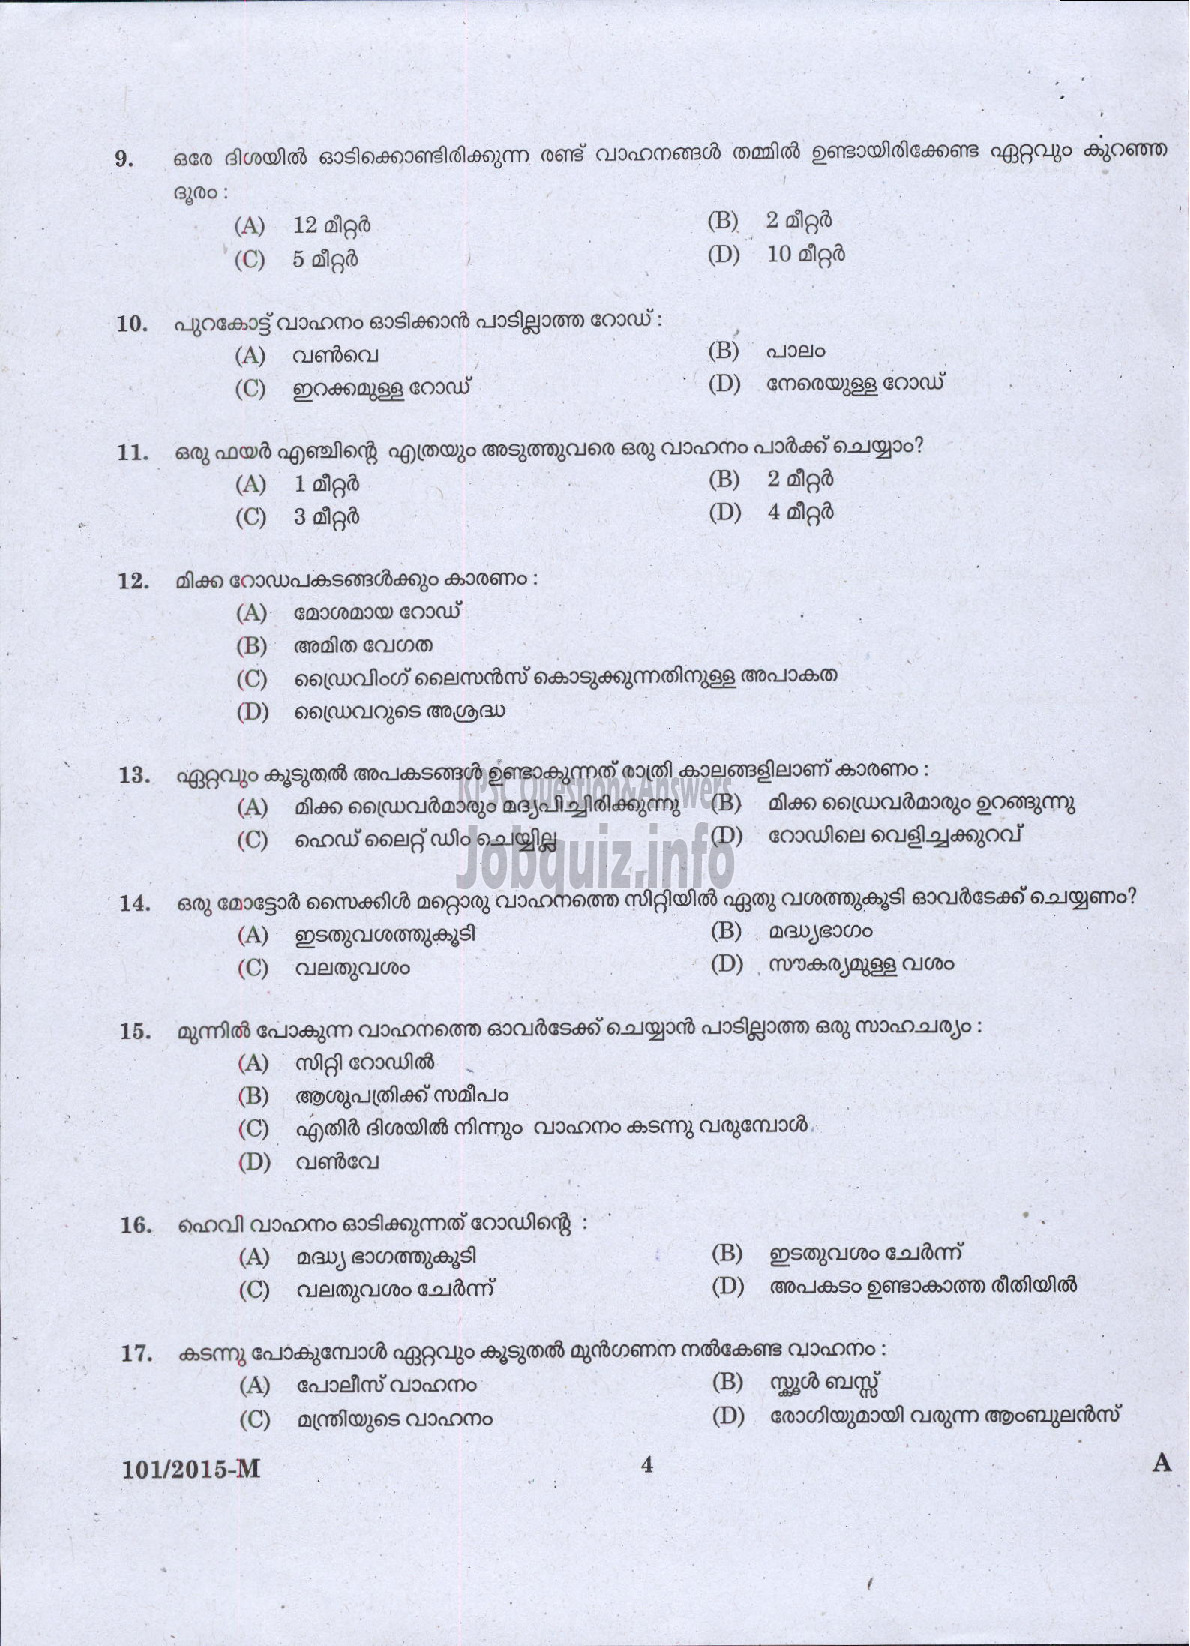 Kerala PSC Question Paper - FIREMAN DRIVER CUM PUMP OPERATOR TRAINEE FIRE AND RESCUE SERVICES ( Malayalam ) -2